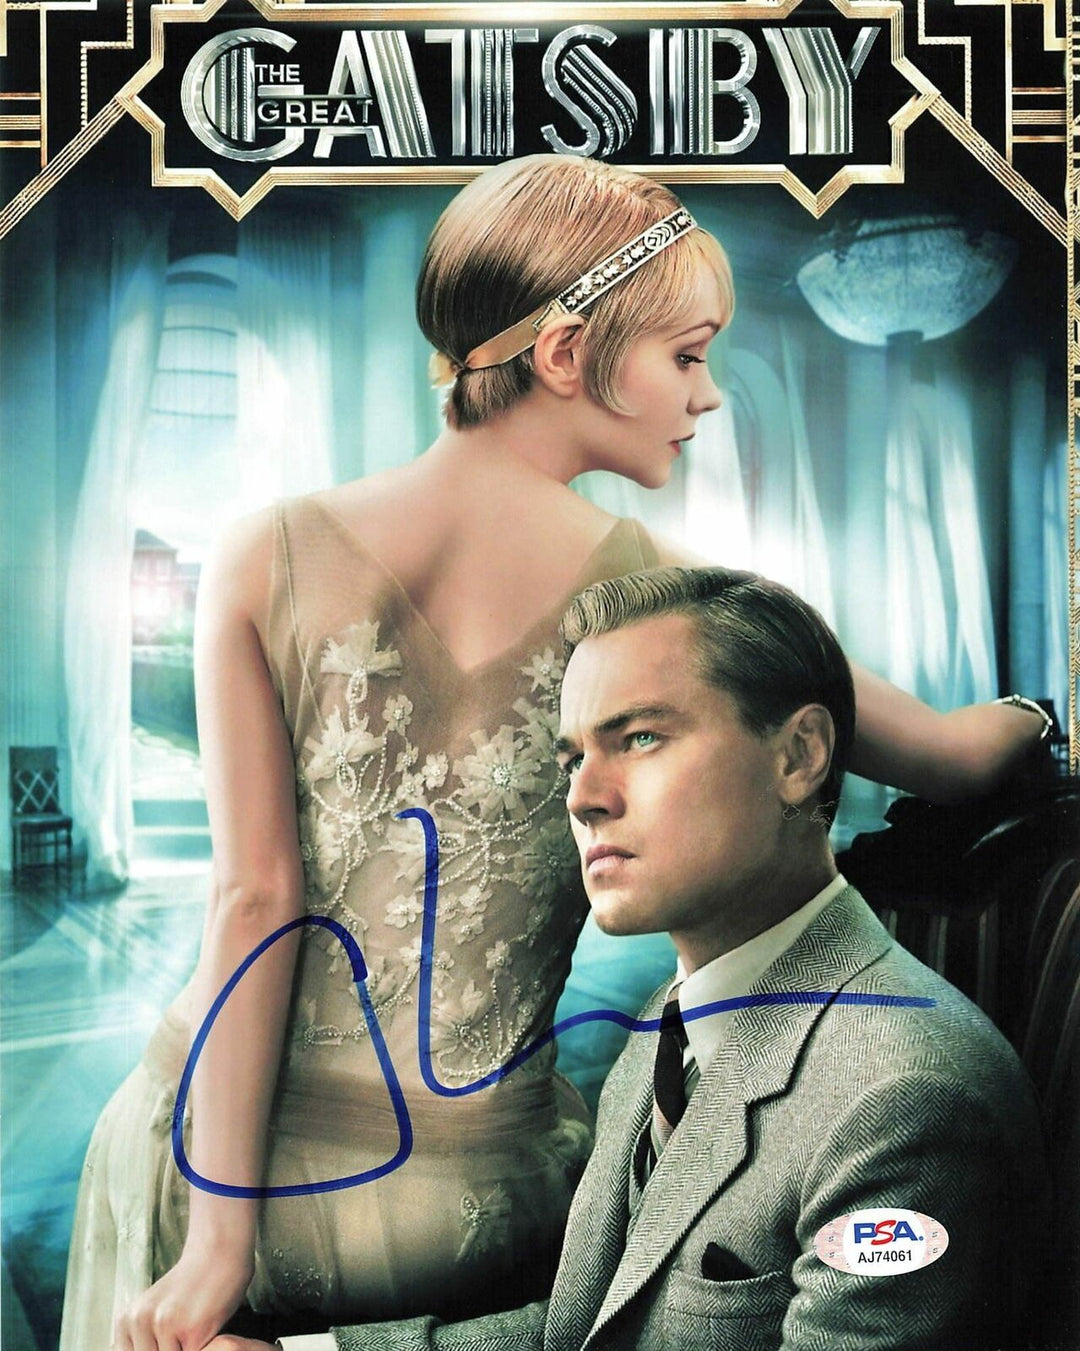 CAREY MULLIGAN signed 8x10 photo PSA/DNA Autographed the Great Gatsby Image 1